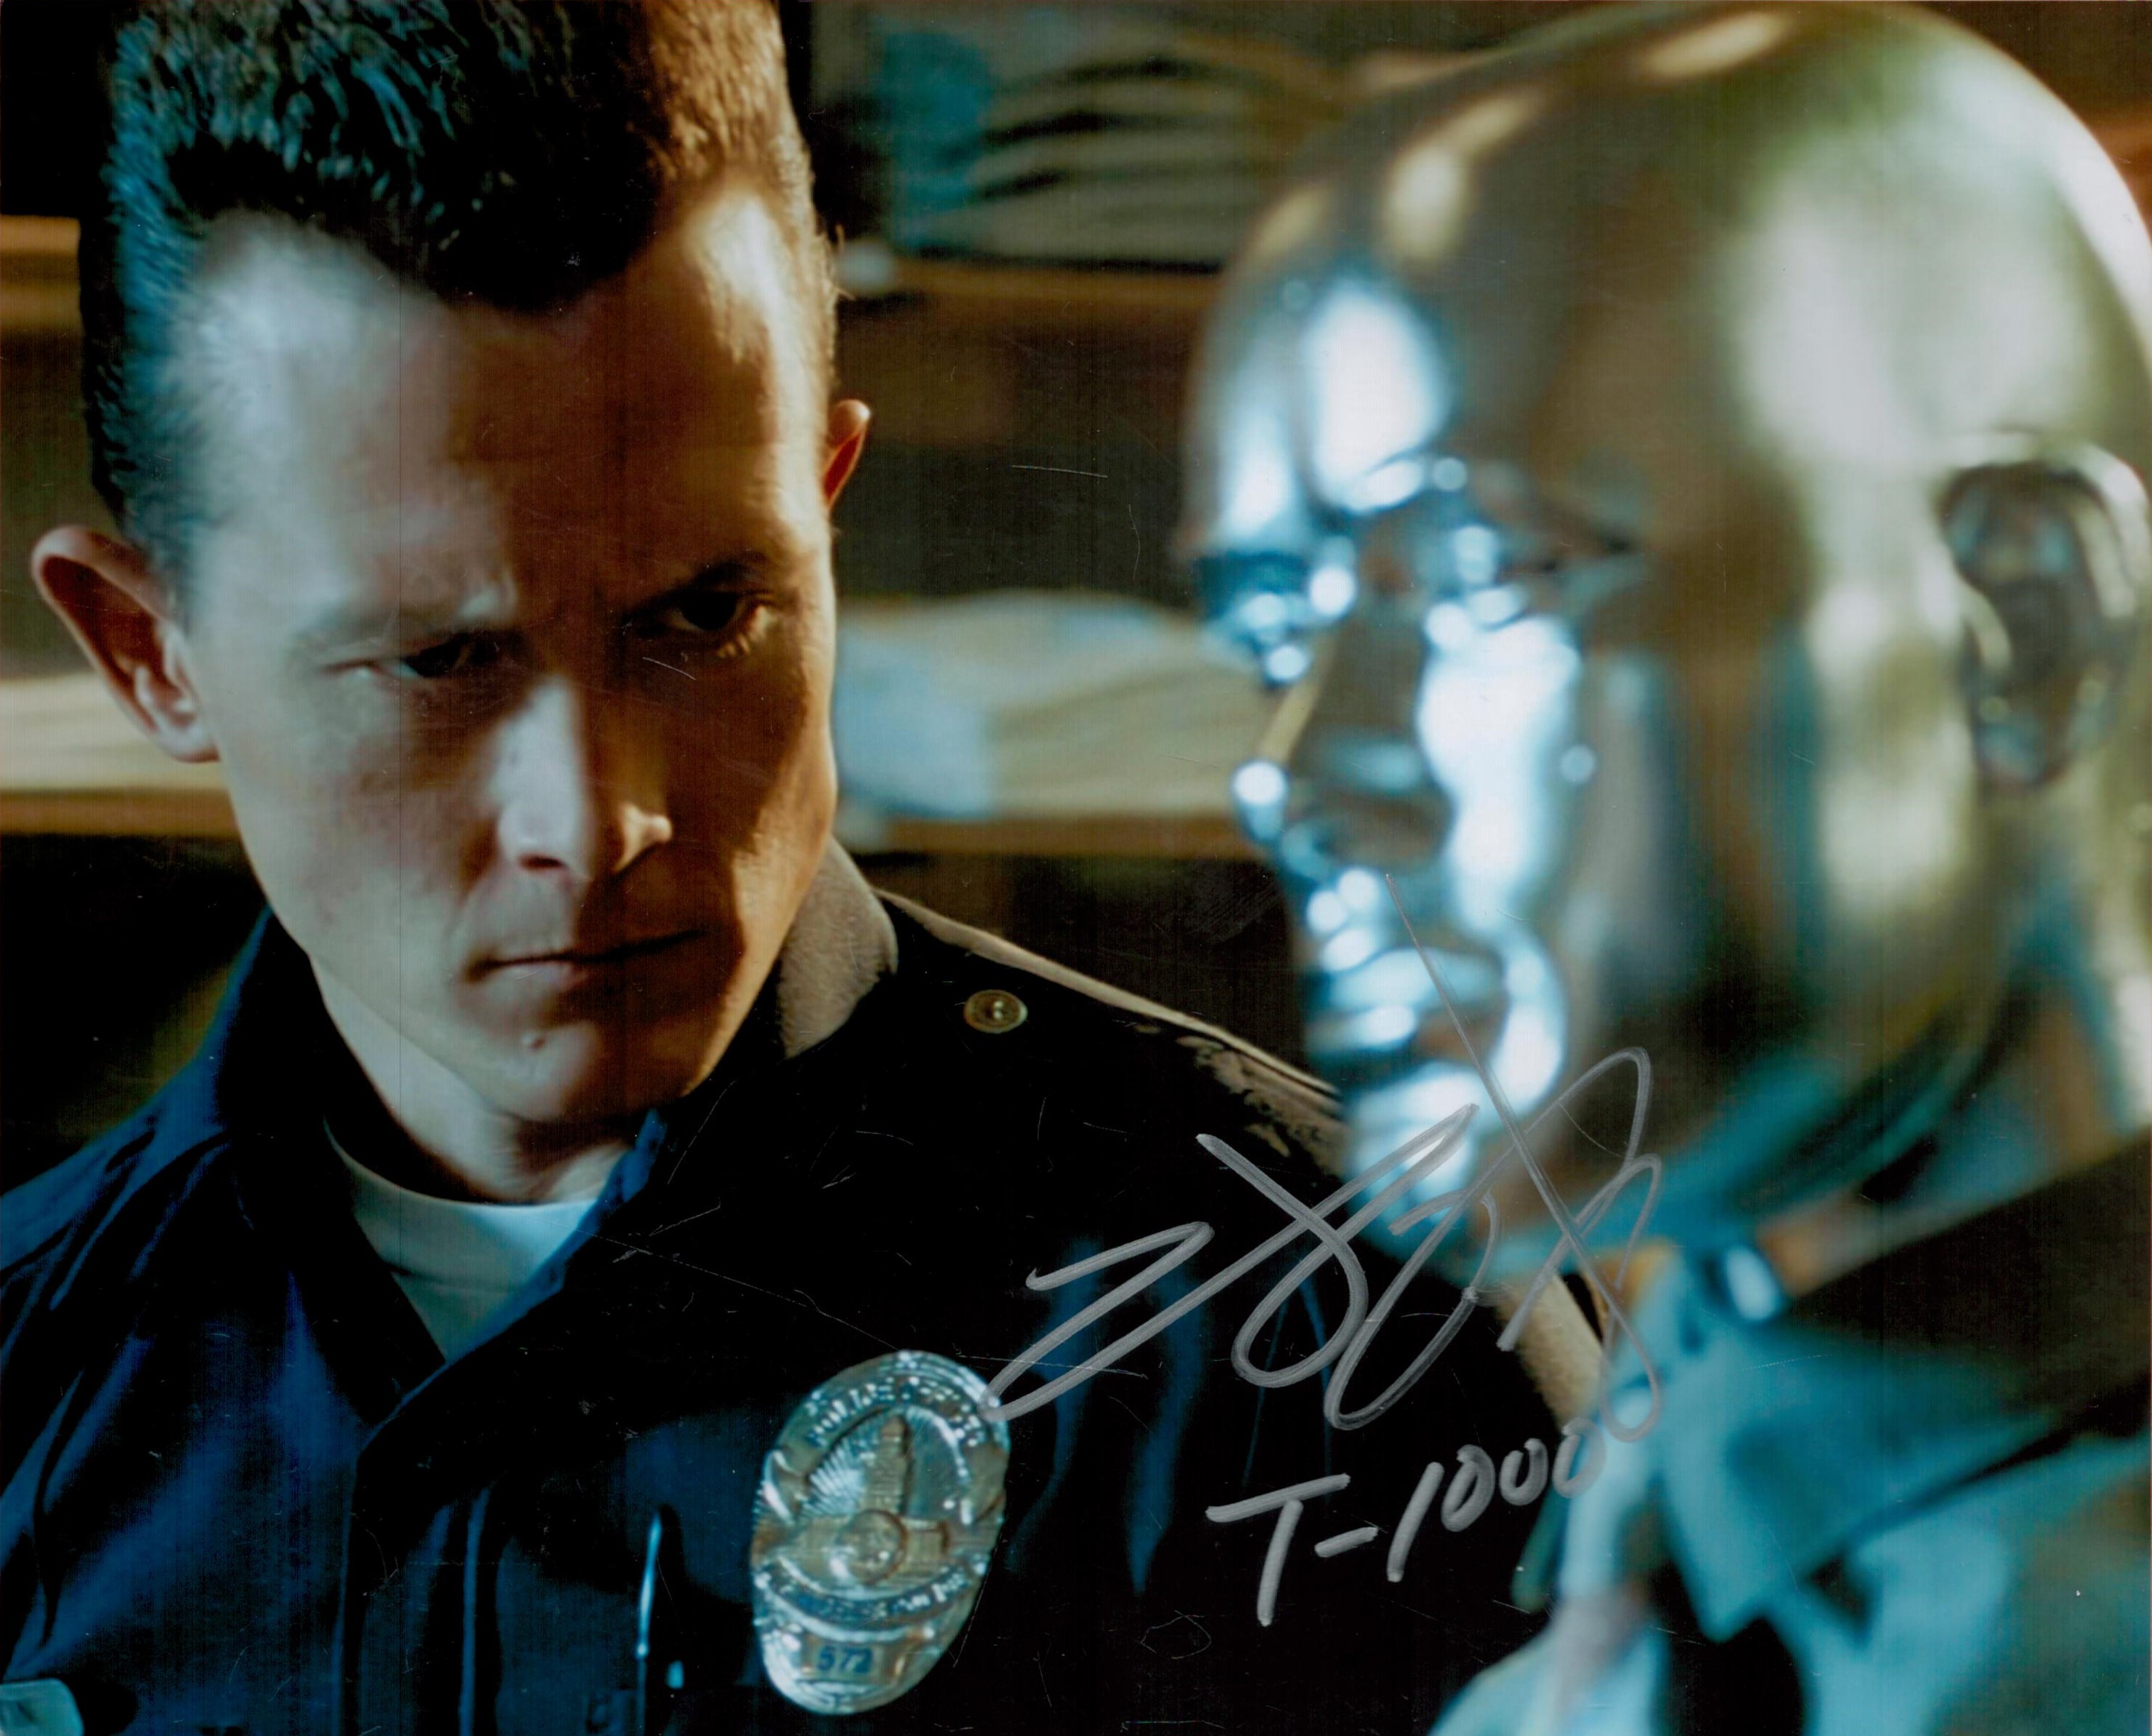 Terminator Star Robert Patrick (T-1000) Signed 10x8 inch Colour Photo. Signed in silver ink. Good